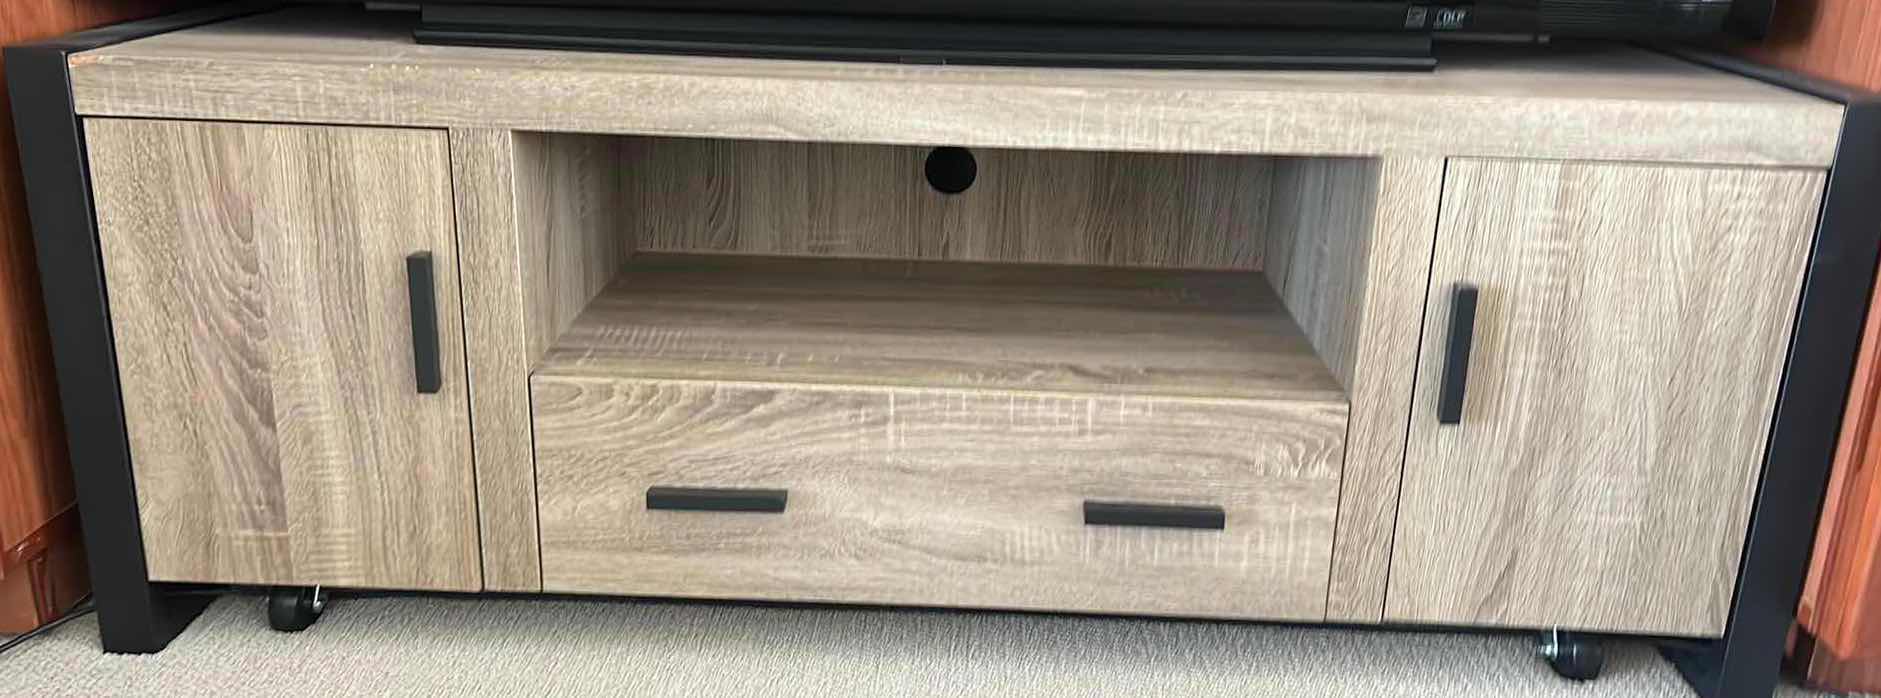 Photo 1 of WOOD CABINET WITH BLACK METAL ACCENTS 5’ x 15 1/2“ x 21 1/2“